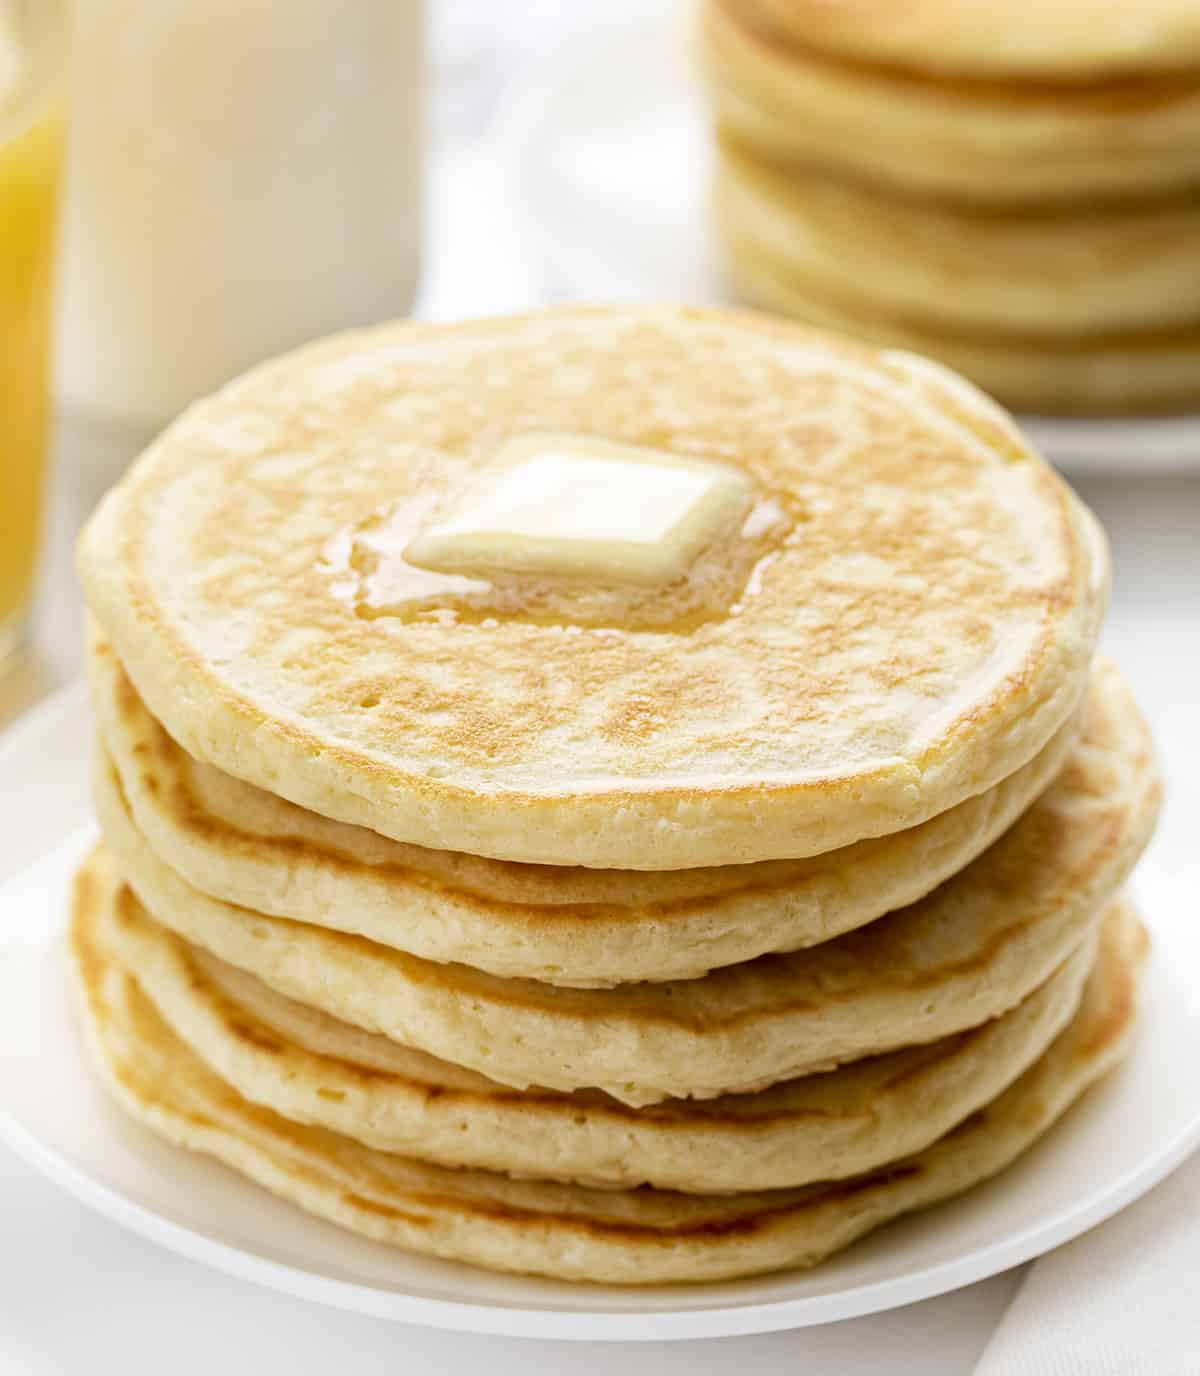 Stack of Old Fashioned Pancakes with Breakfast Settings. Breakfast, Pancakes, Old Fahsioned Pancakes, Classic Pancake Recipe, Grandma's Pancake Recipe, i am baker, iambaker.